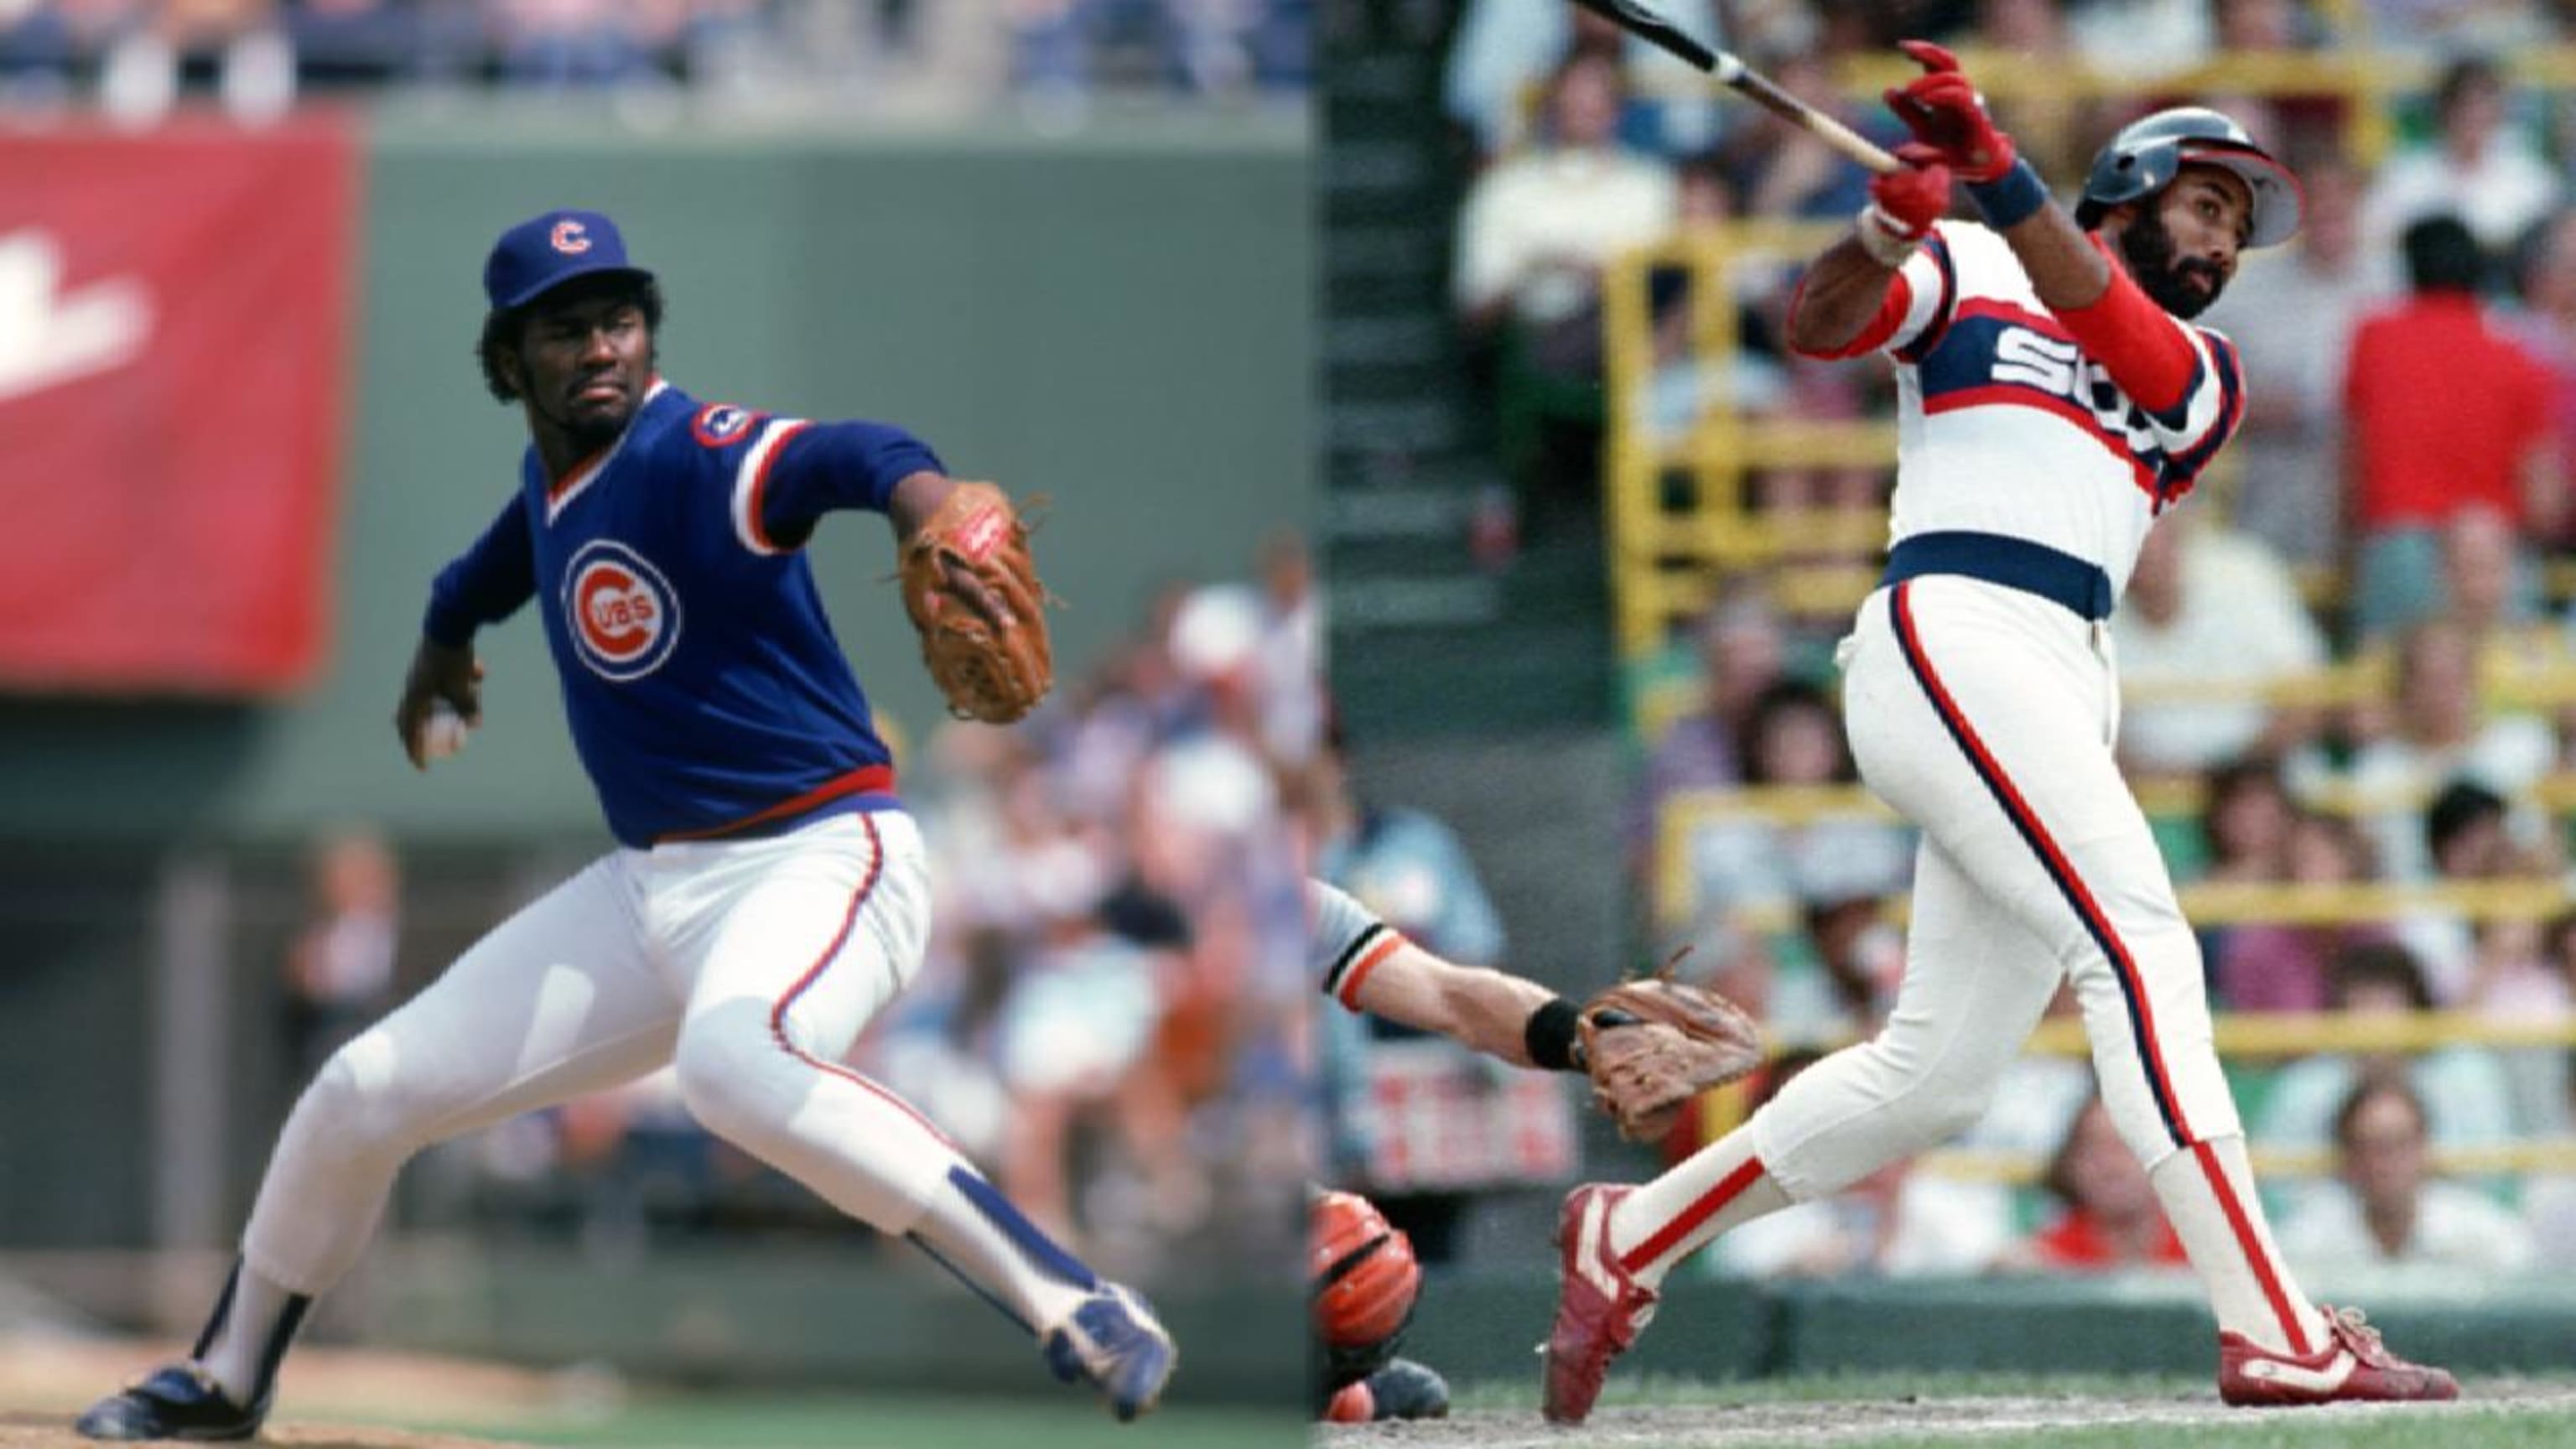 Baseball Hall of Fame Voting Results: Harold Baines, Lee Smith